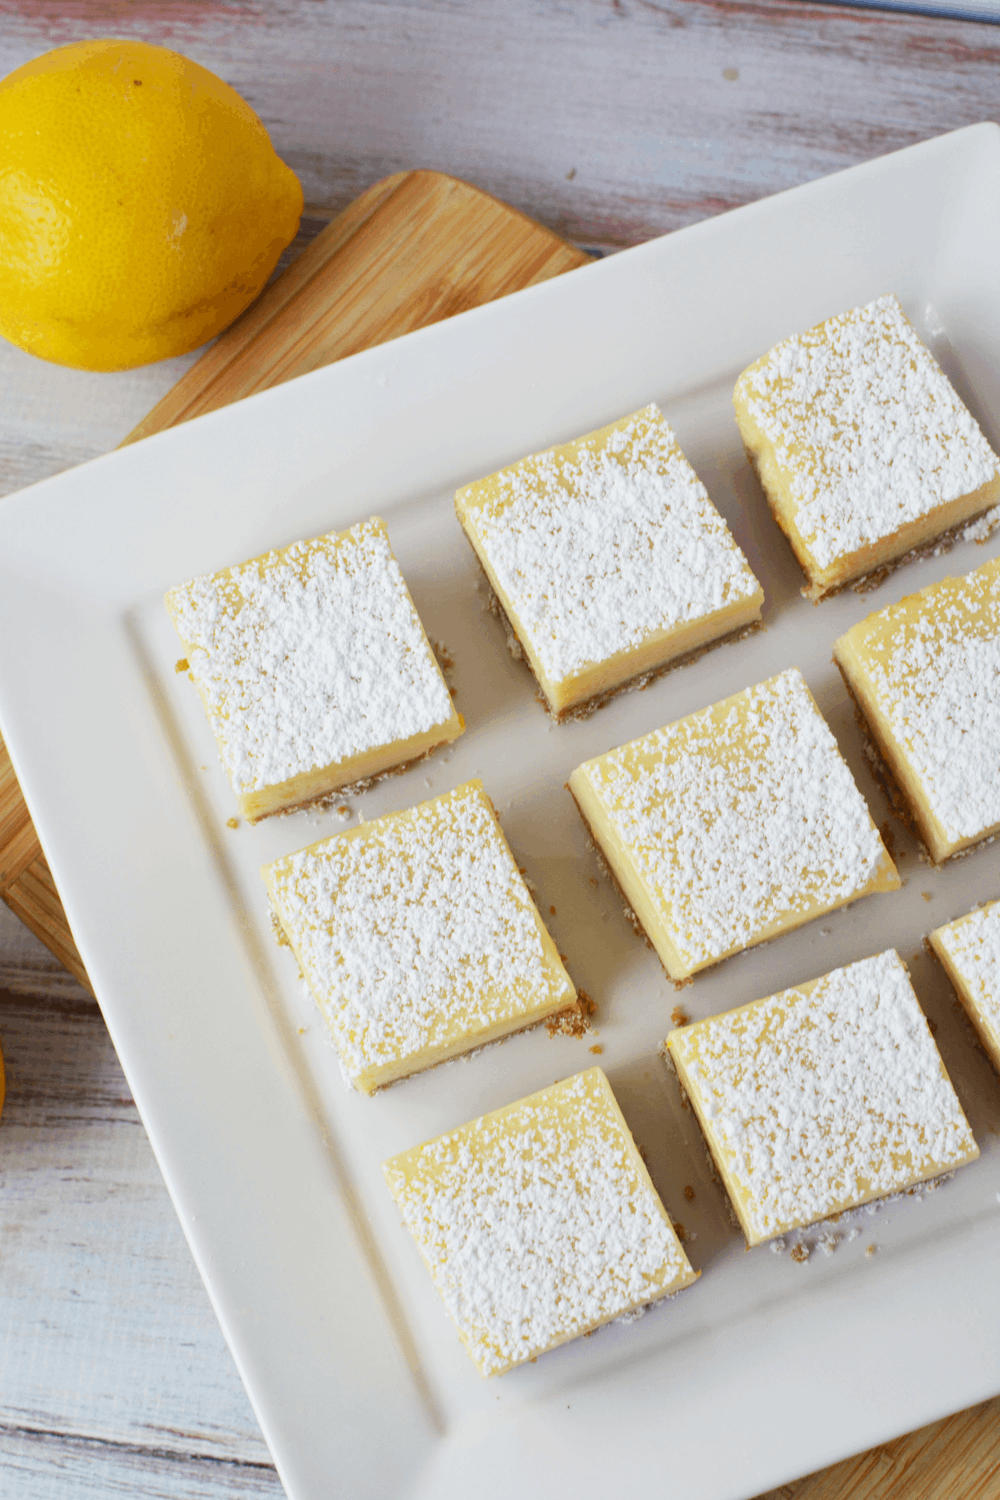 Lemon Bars with Graham Cracker Crust cut into squares on a platter